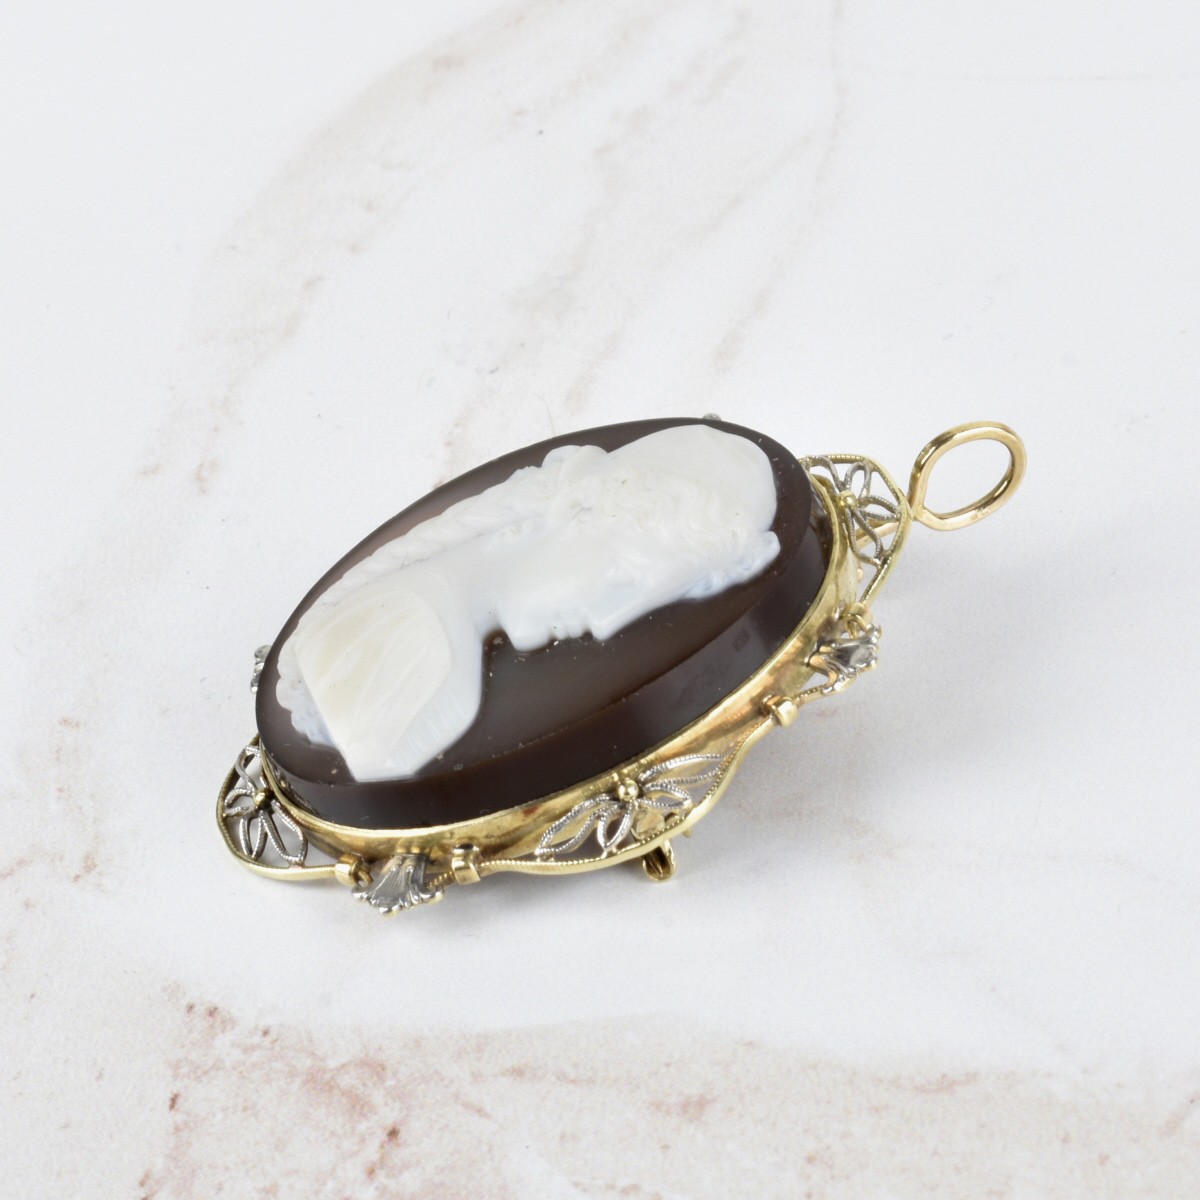 Victorian Agate and 14K Cameo Pendant